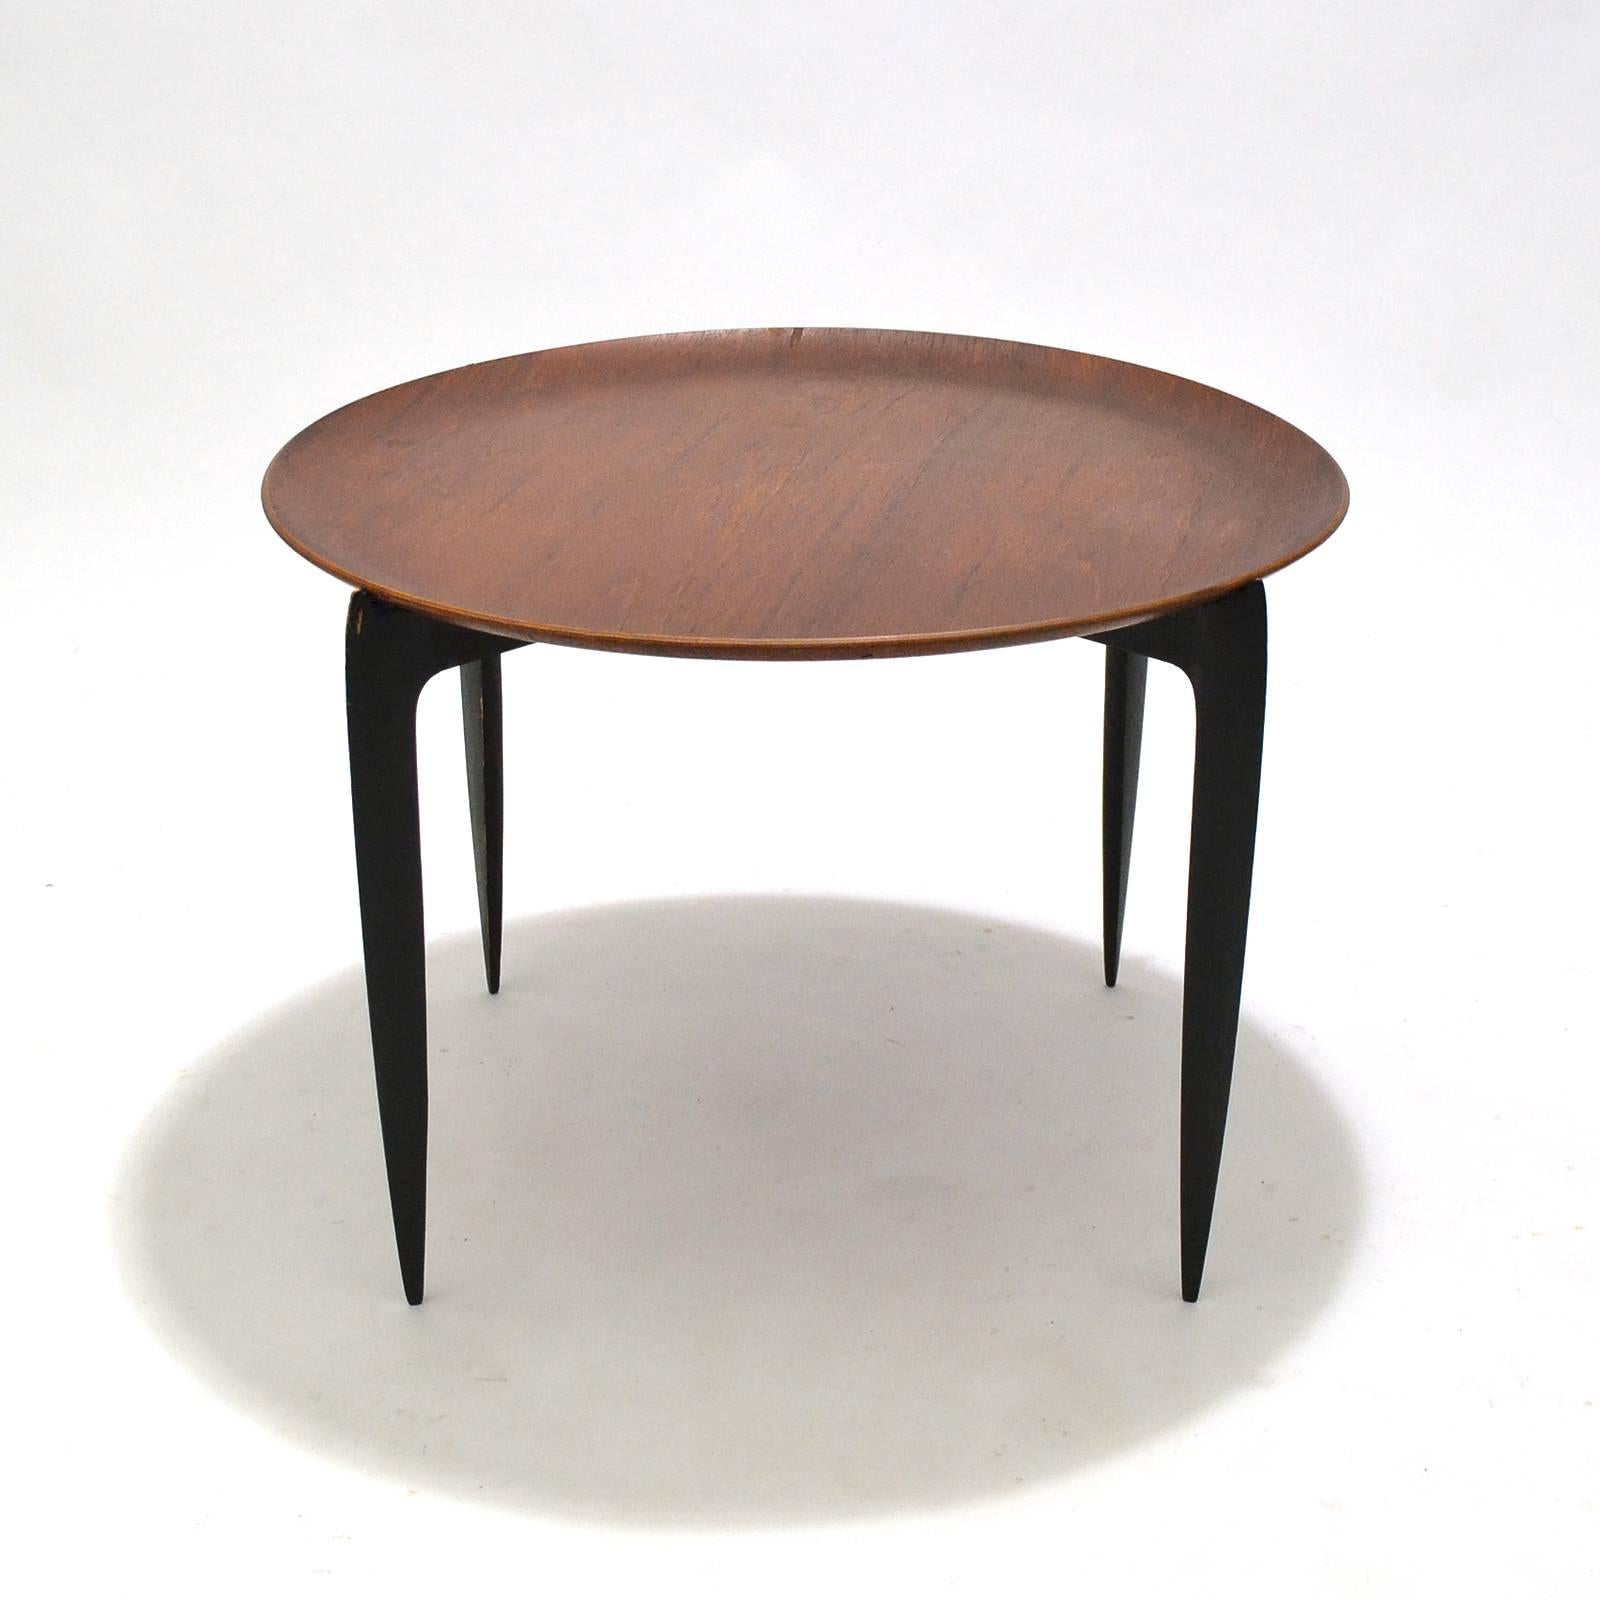 Light, leggy, and incredibly useful, this tray-top table designed by Svend Aage Willumsen & H. Engholm and made by Fritz Hansen folds flat for easy storage when not in use. When open, the sleek tapered black legs support the teak top with a raised